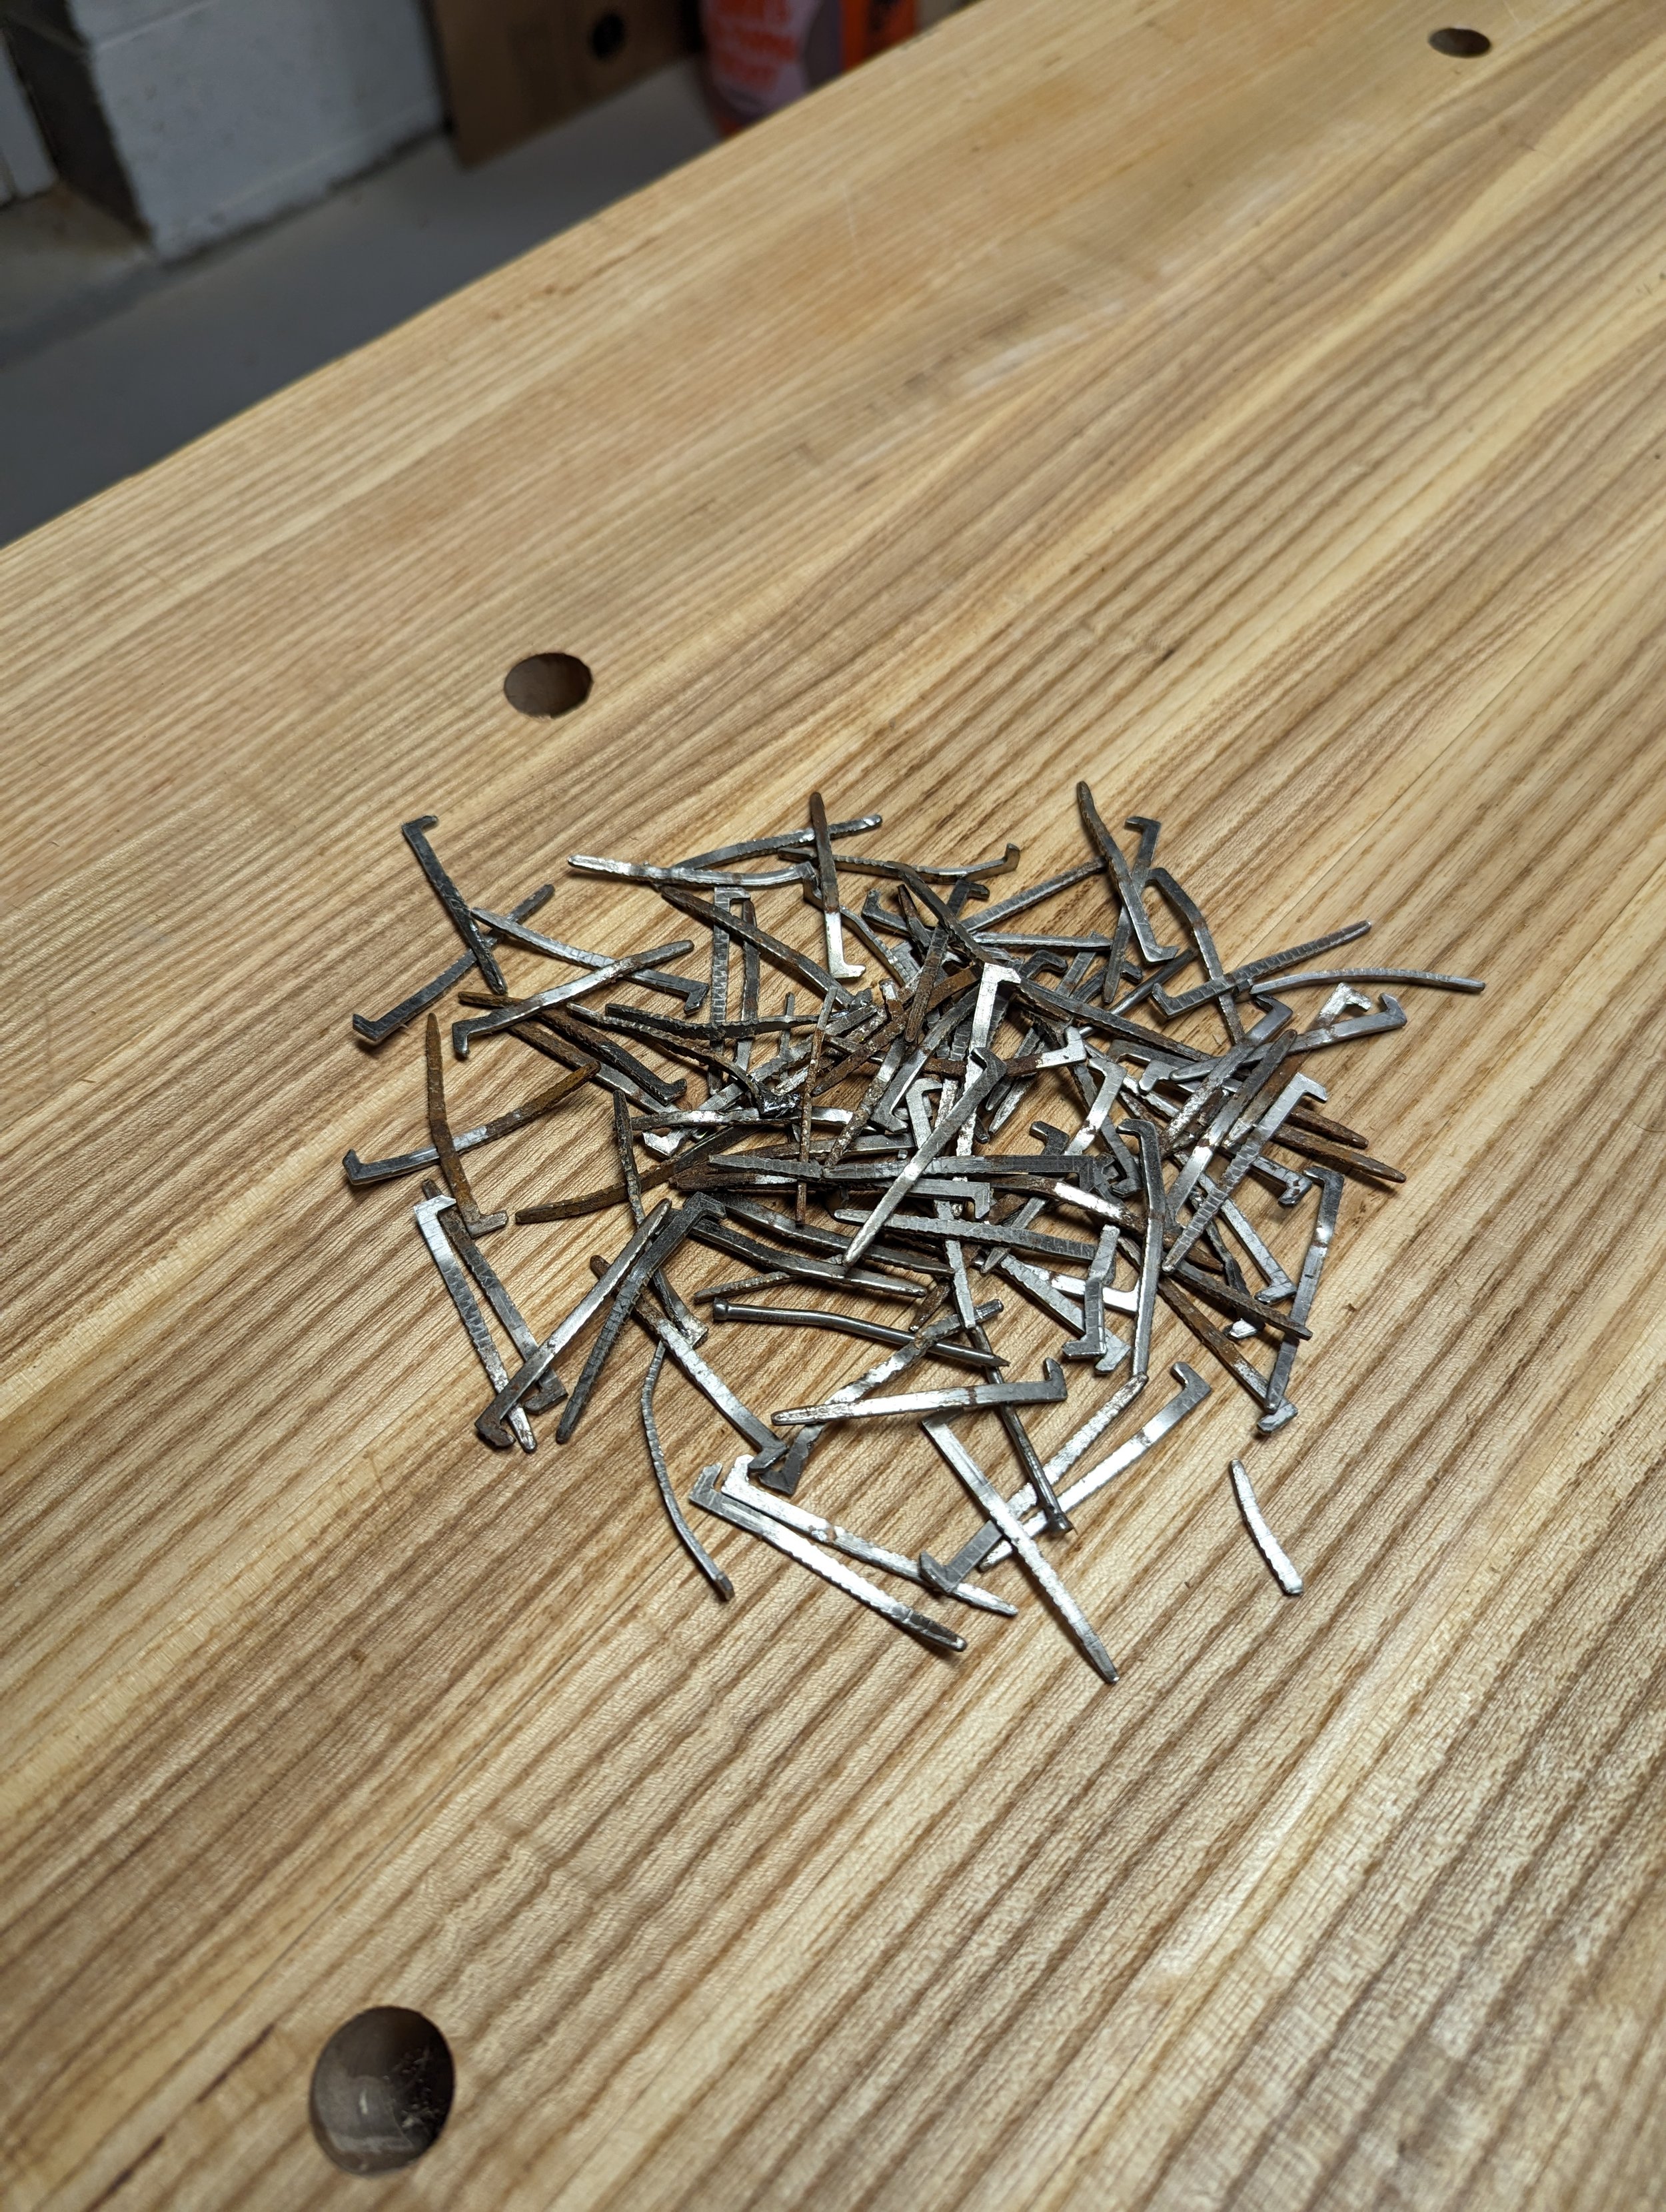  Here are all the nails that were removed. Took a few hours to get through all of the boards. 